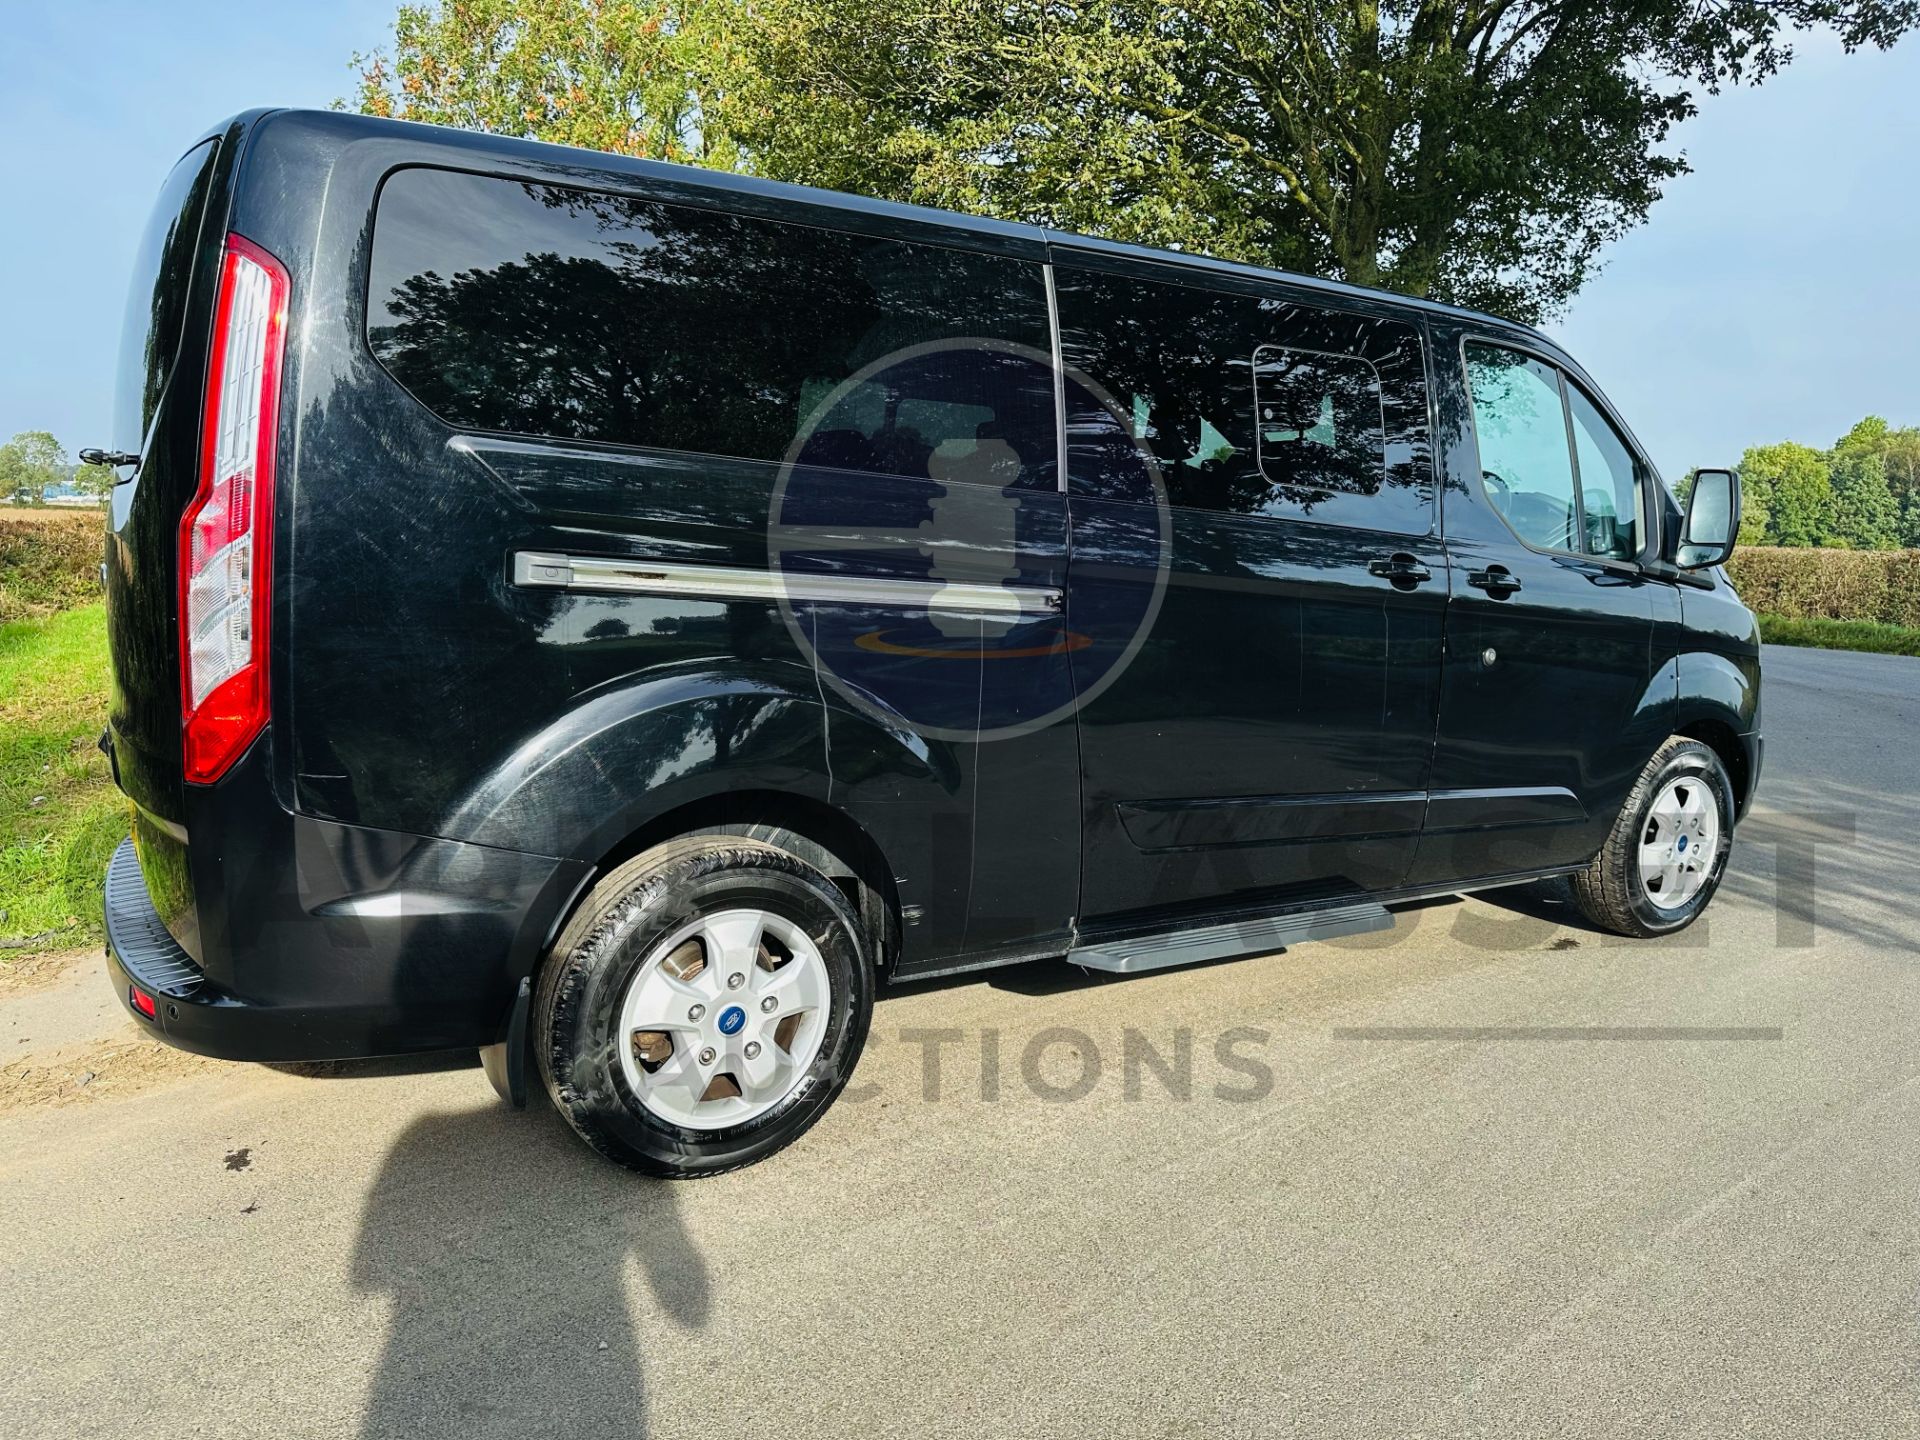 (On Sale) FORD TRANSIT TOURNEO CUSTOM *LWB 9 SEATER BUS* (2018 - EURO 6) 2.0 TDCI - AUTO (1 OWNER) - Image 14 of 42